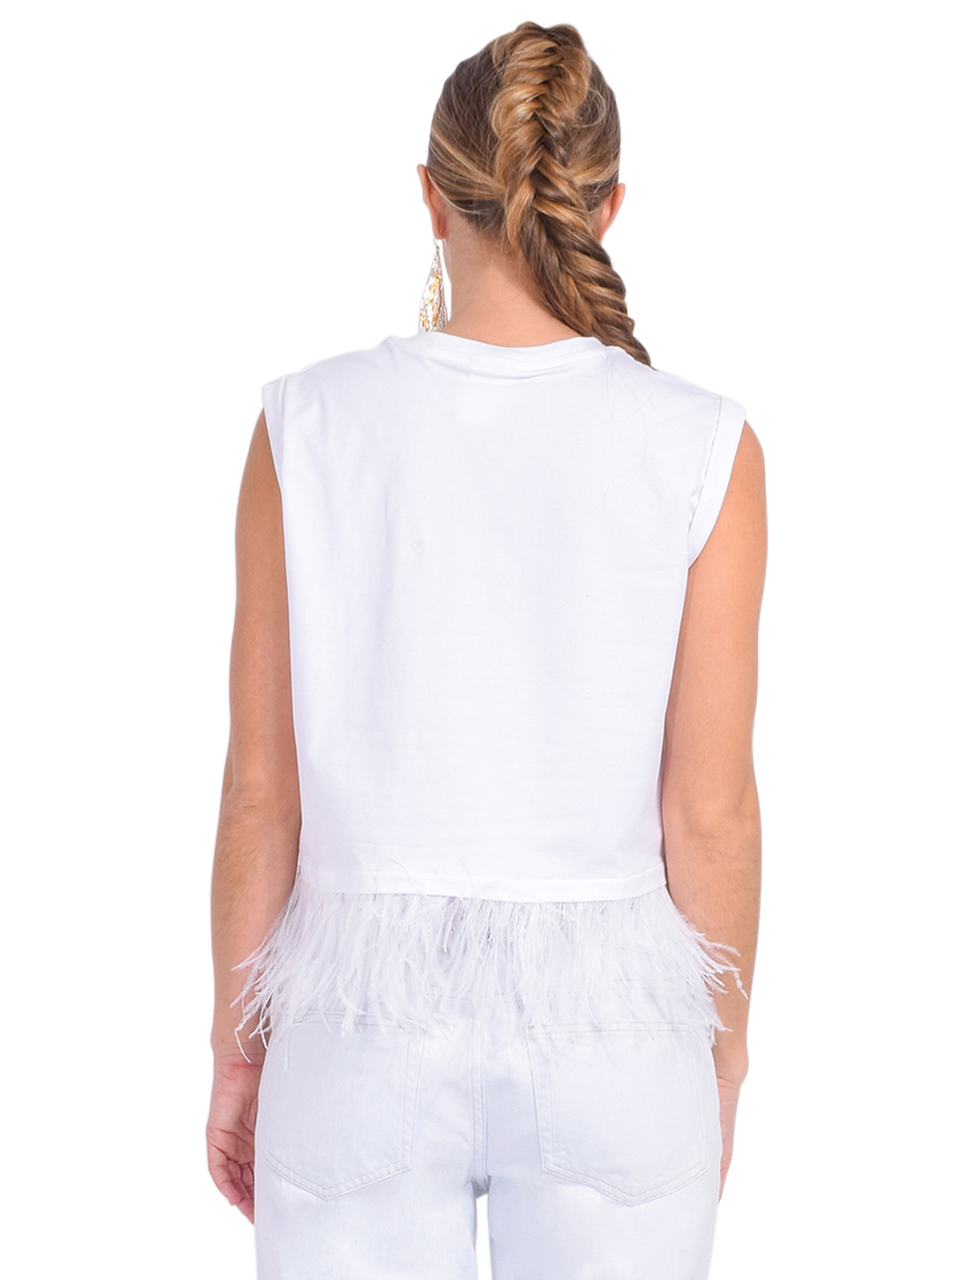 Cinq à Sept Cropped Feather Tee in White Back View 